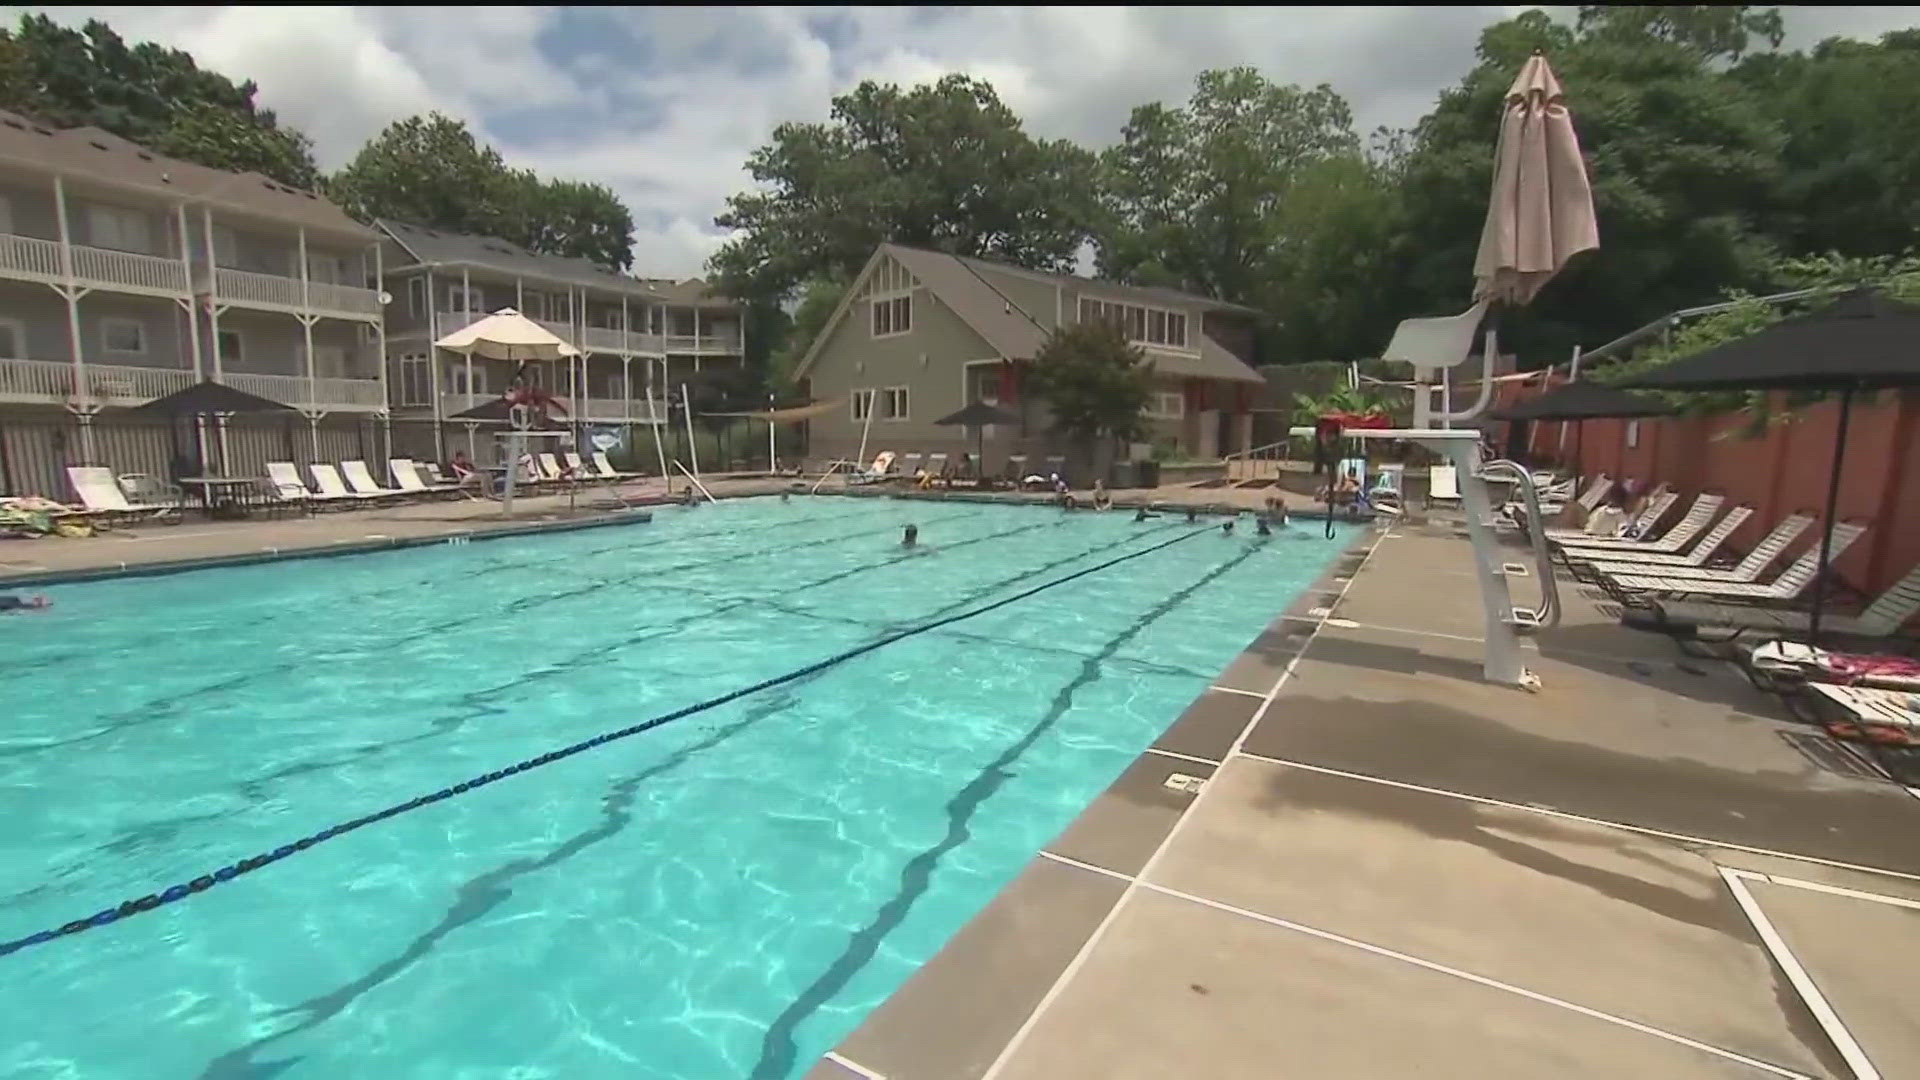 Doctors and nurses are warning families to exercise caution in the water.